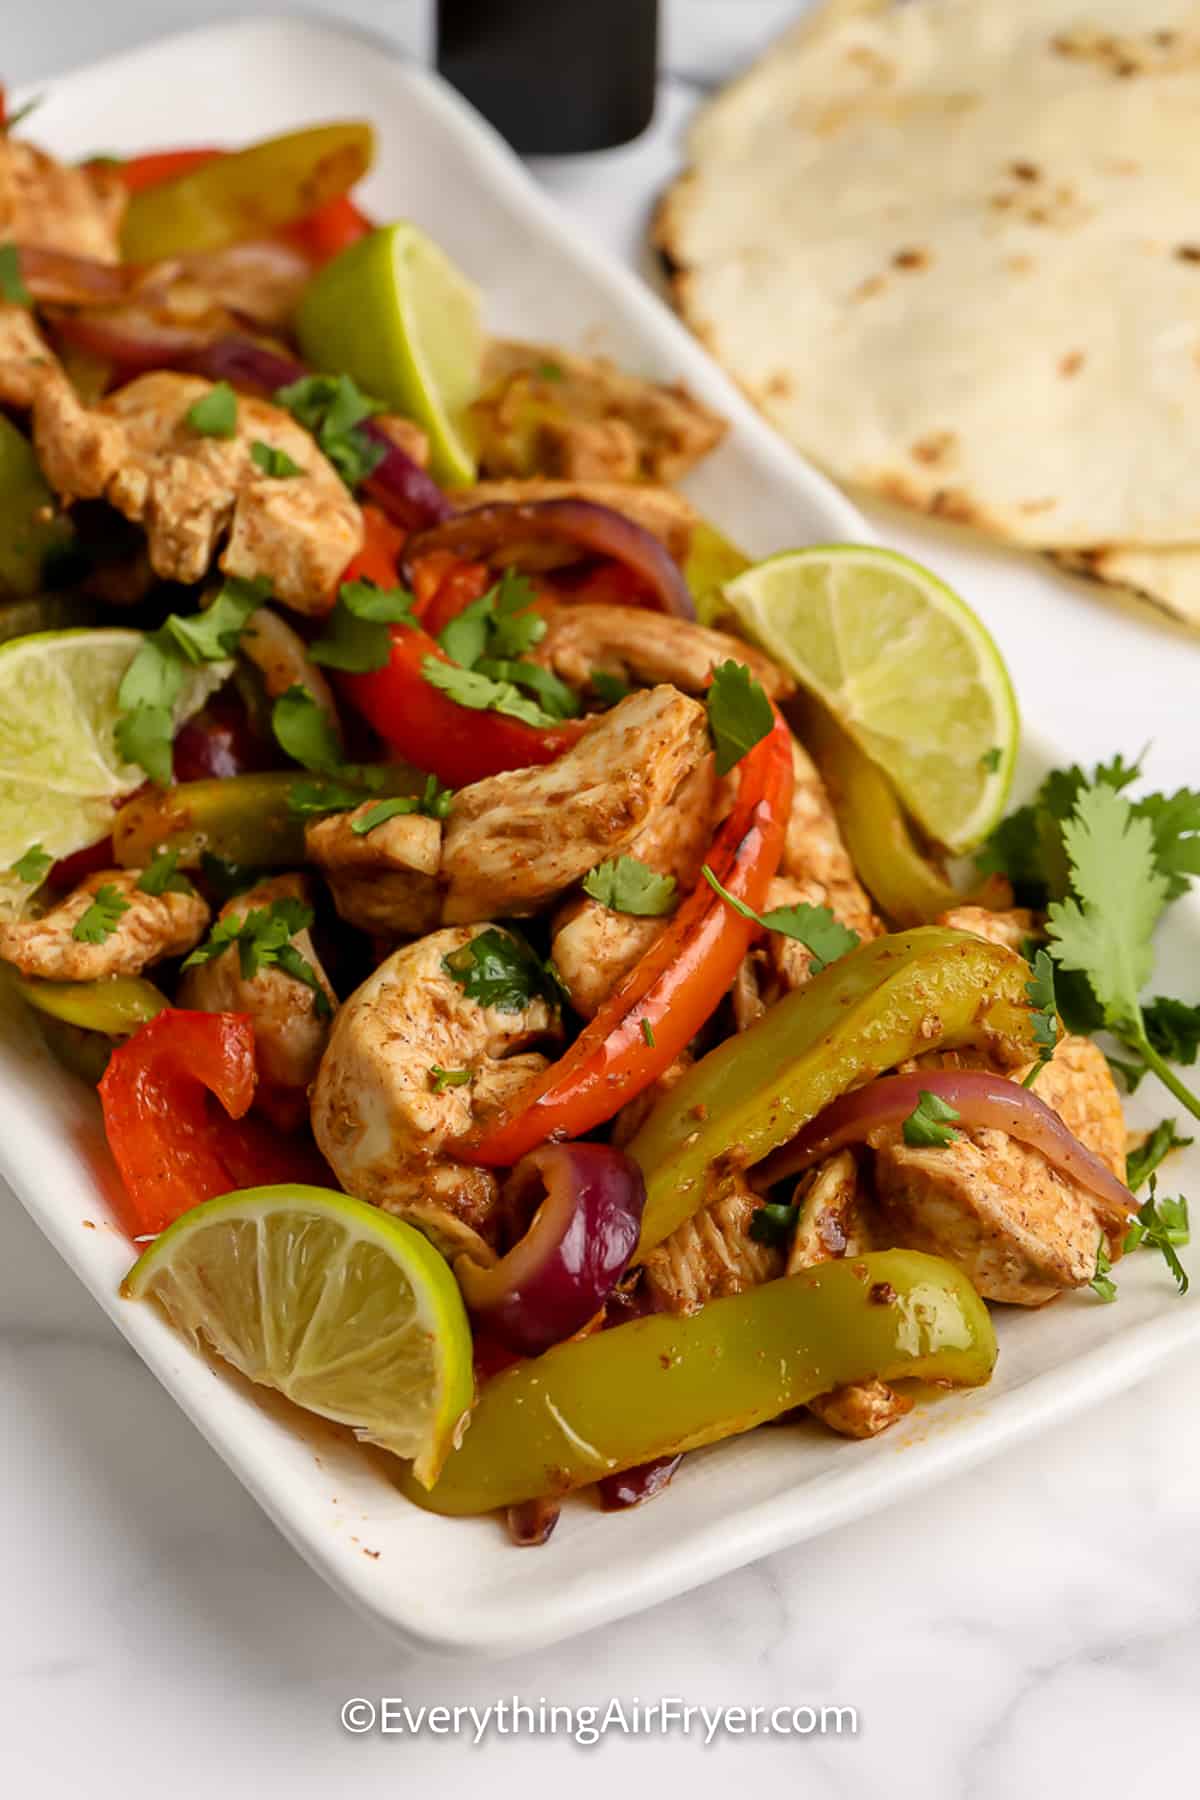 A serving platter of Air Fryer Chicken Fajitas Ingredients with lime wedges